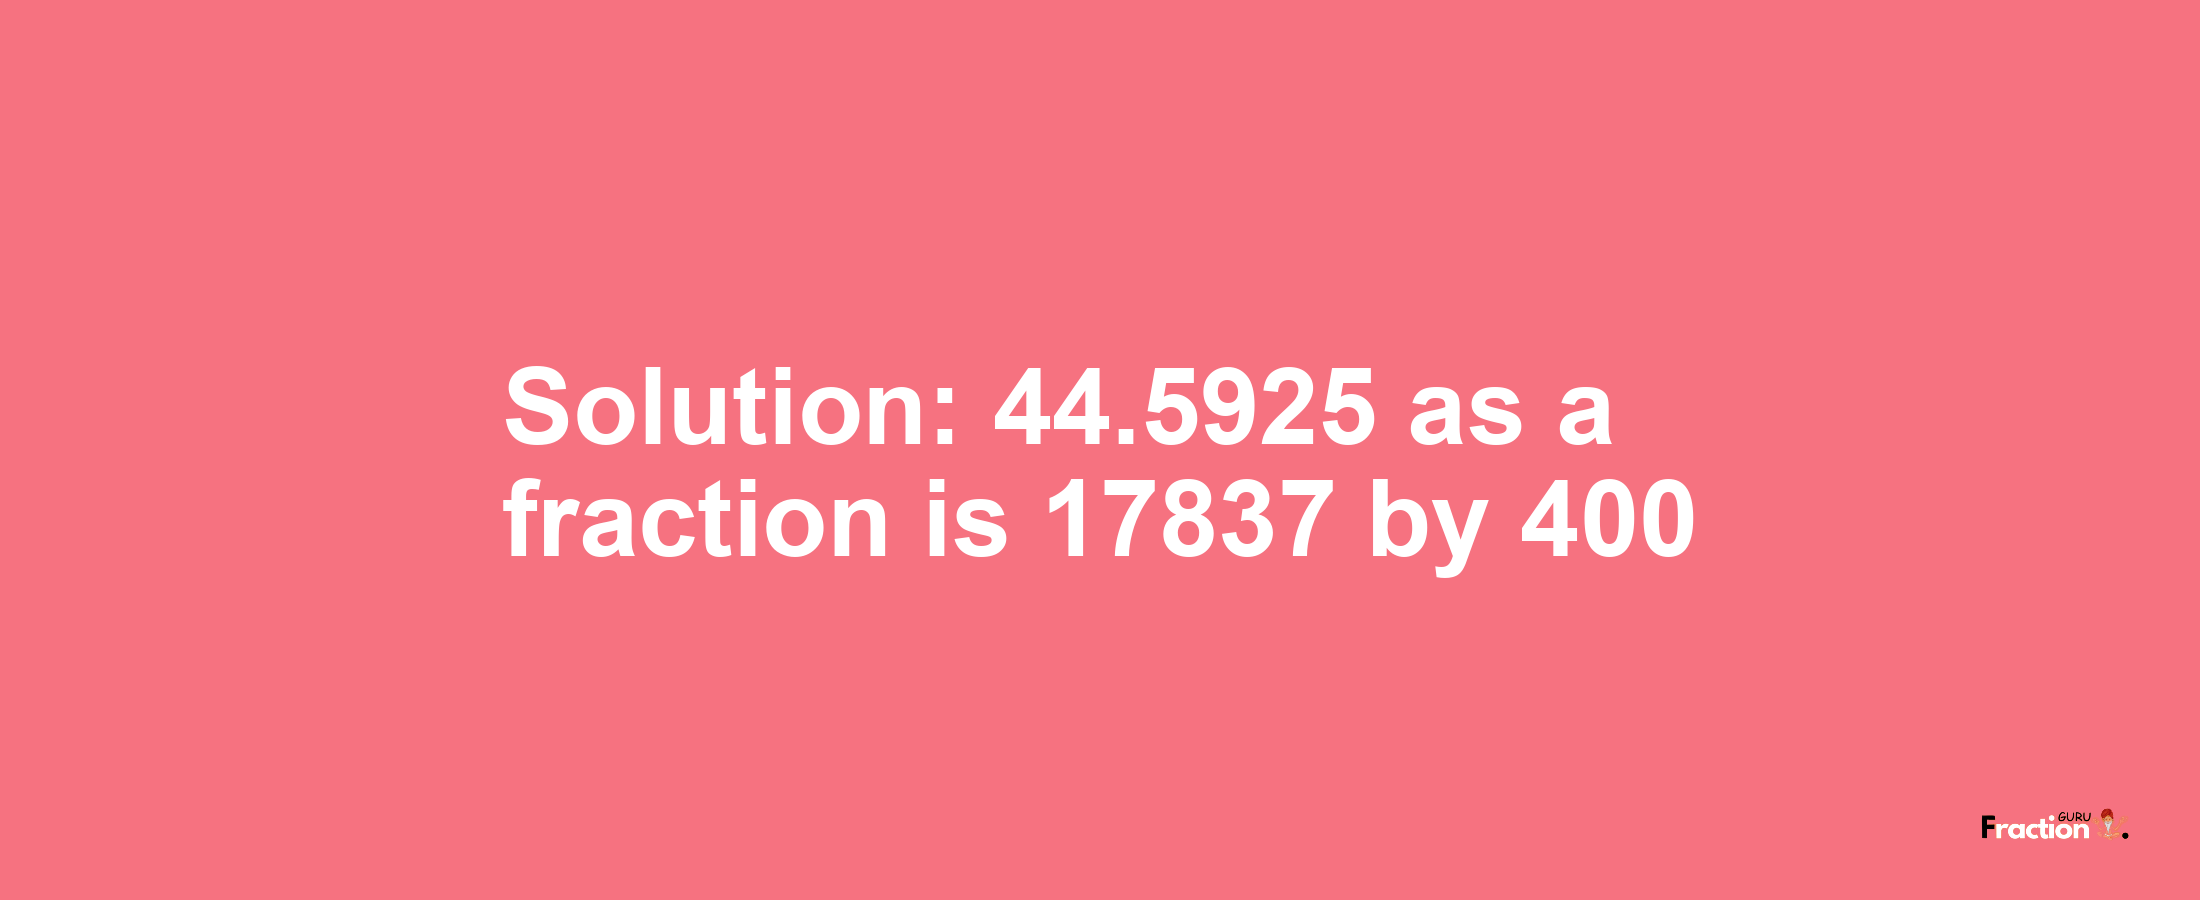 Solution:44.5925 as a fraction is 17837/400